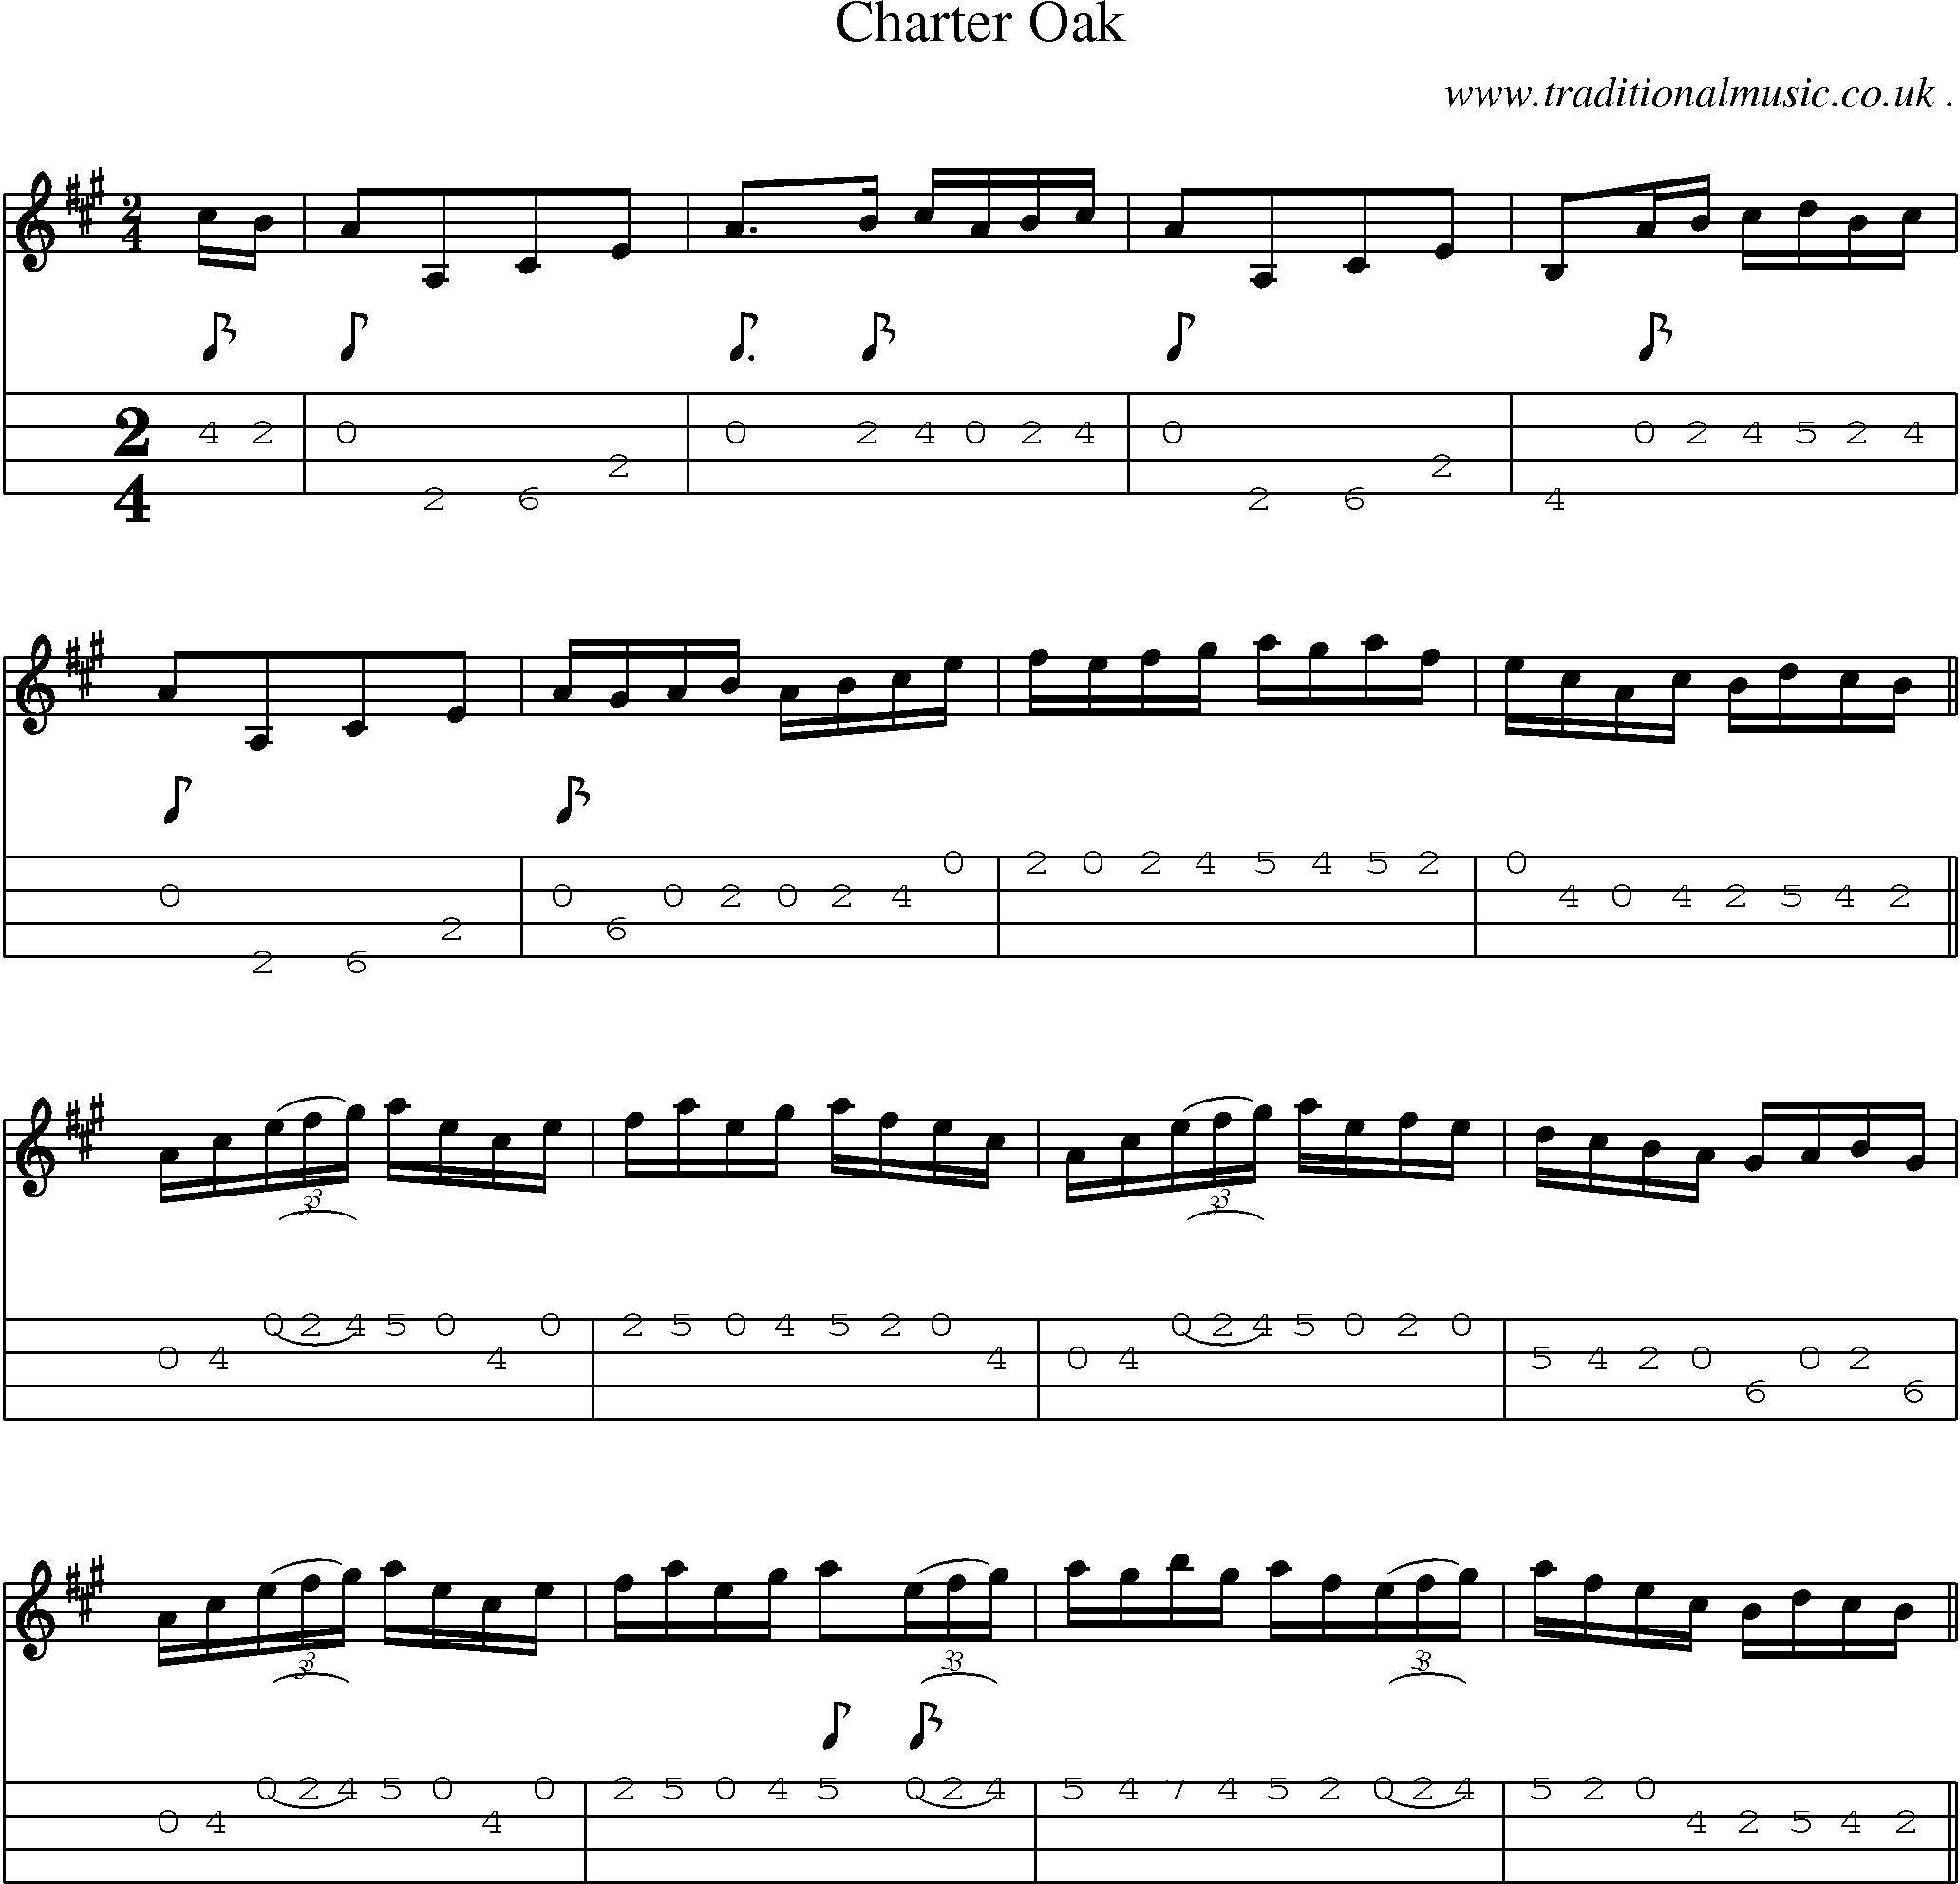 Sheet-Music and Mandolin Tabs for Charter Oak